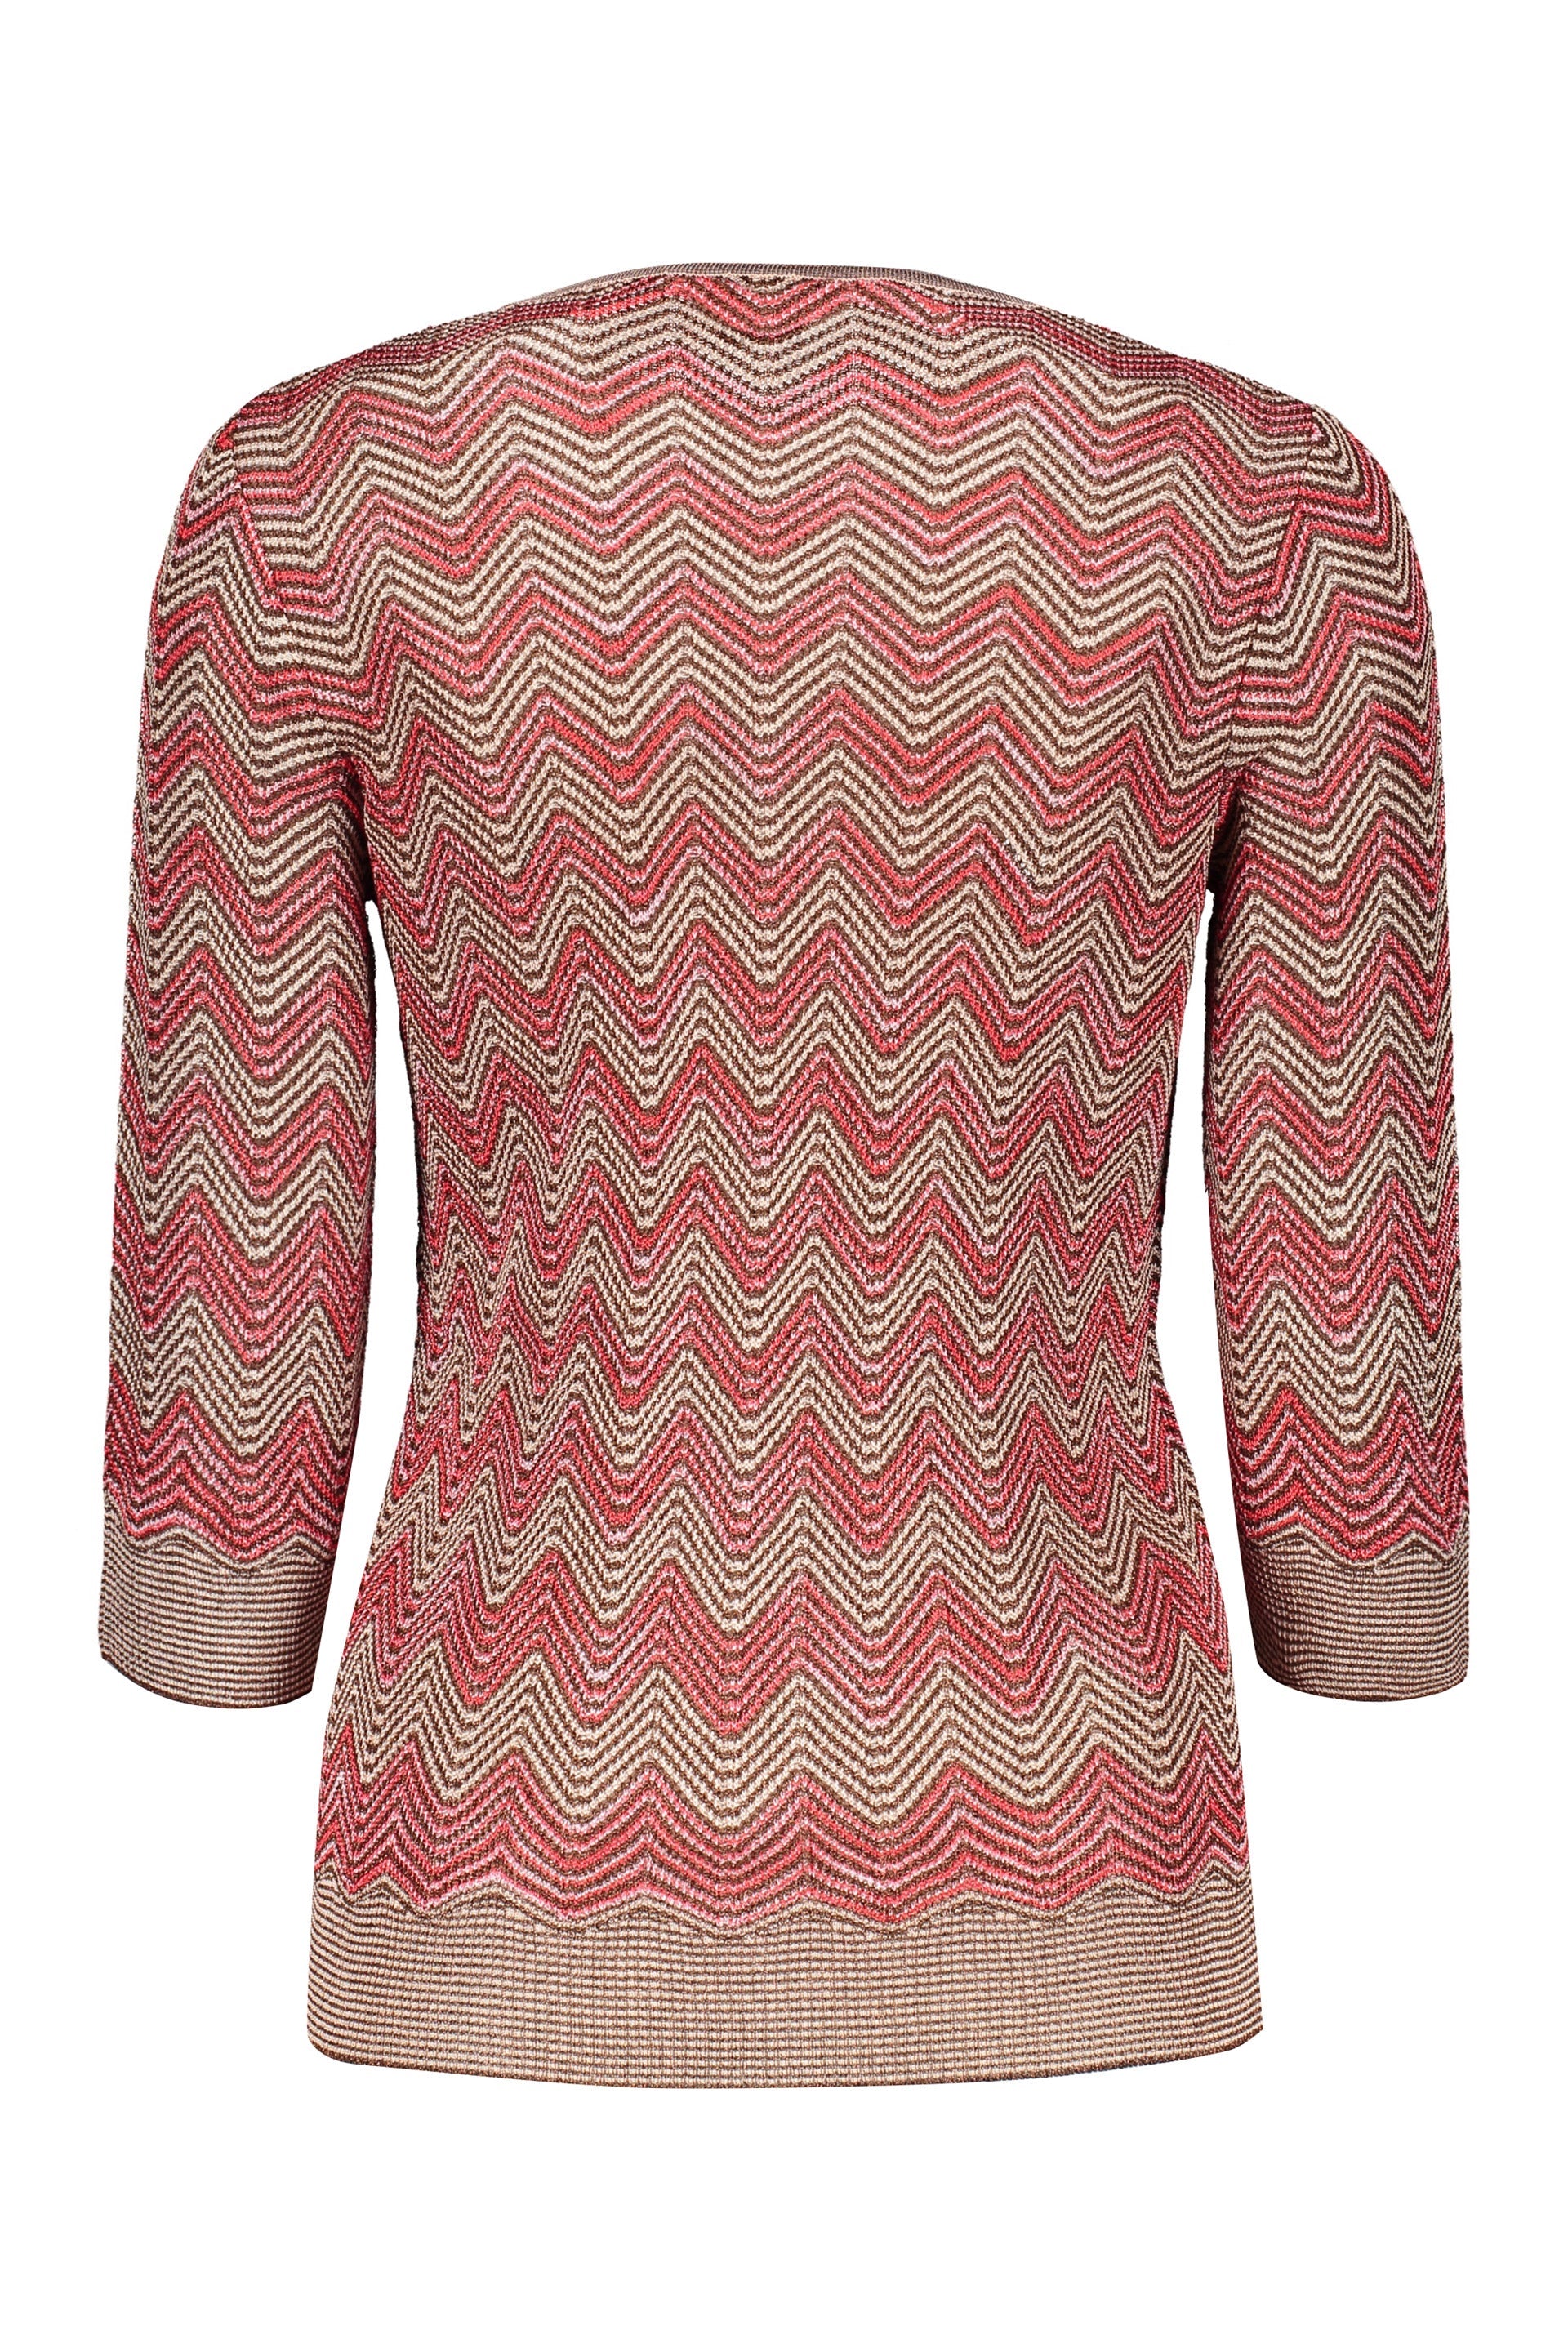 Missoni-OUTLET-SALE-Knitted-top-Shirts-ARCHIVE-COLLECTION-2_39250065-7d73-4d37-a3b5-66bf699eed55.jpg